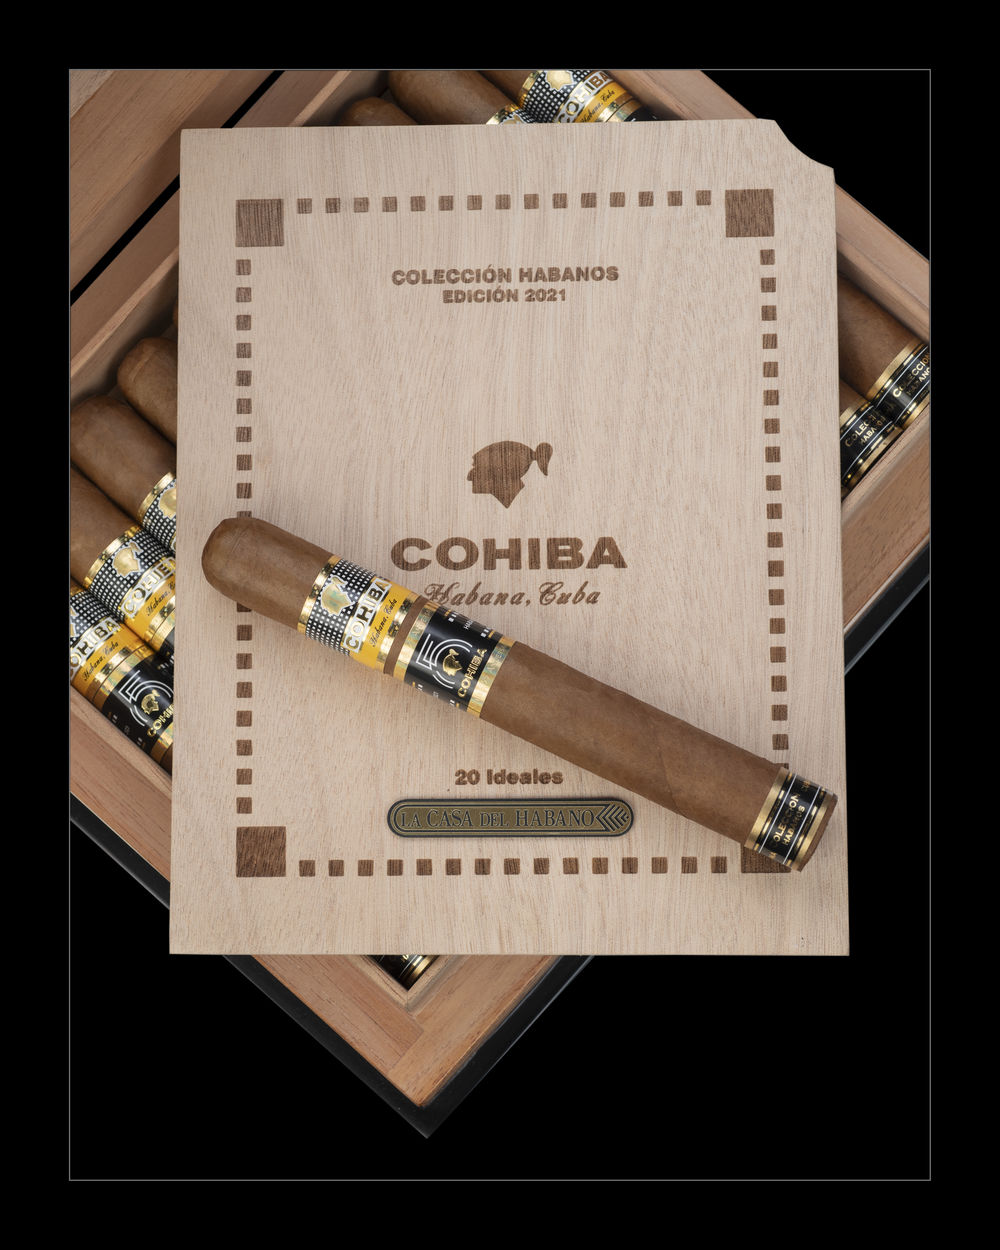 The cigars are still being bought and are still among the most sought-after brands.